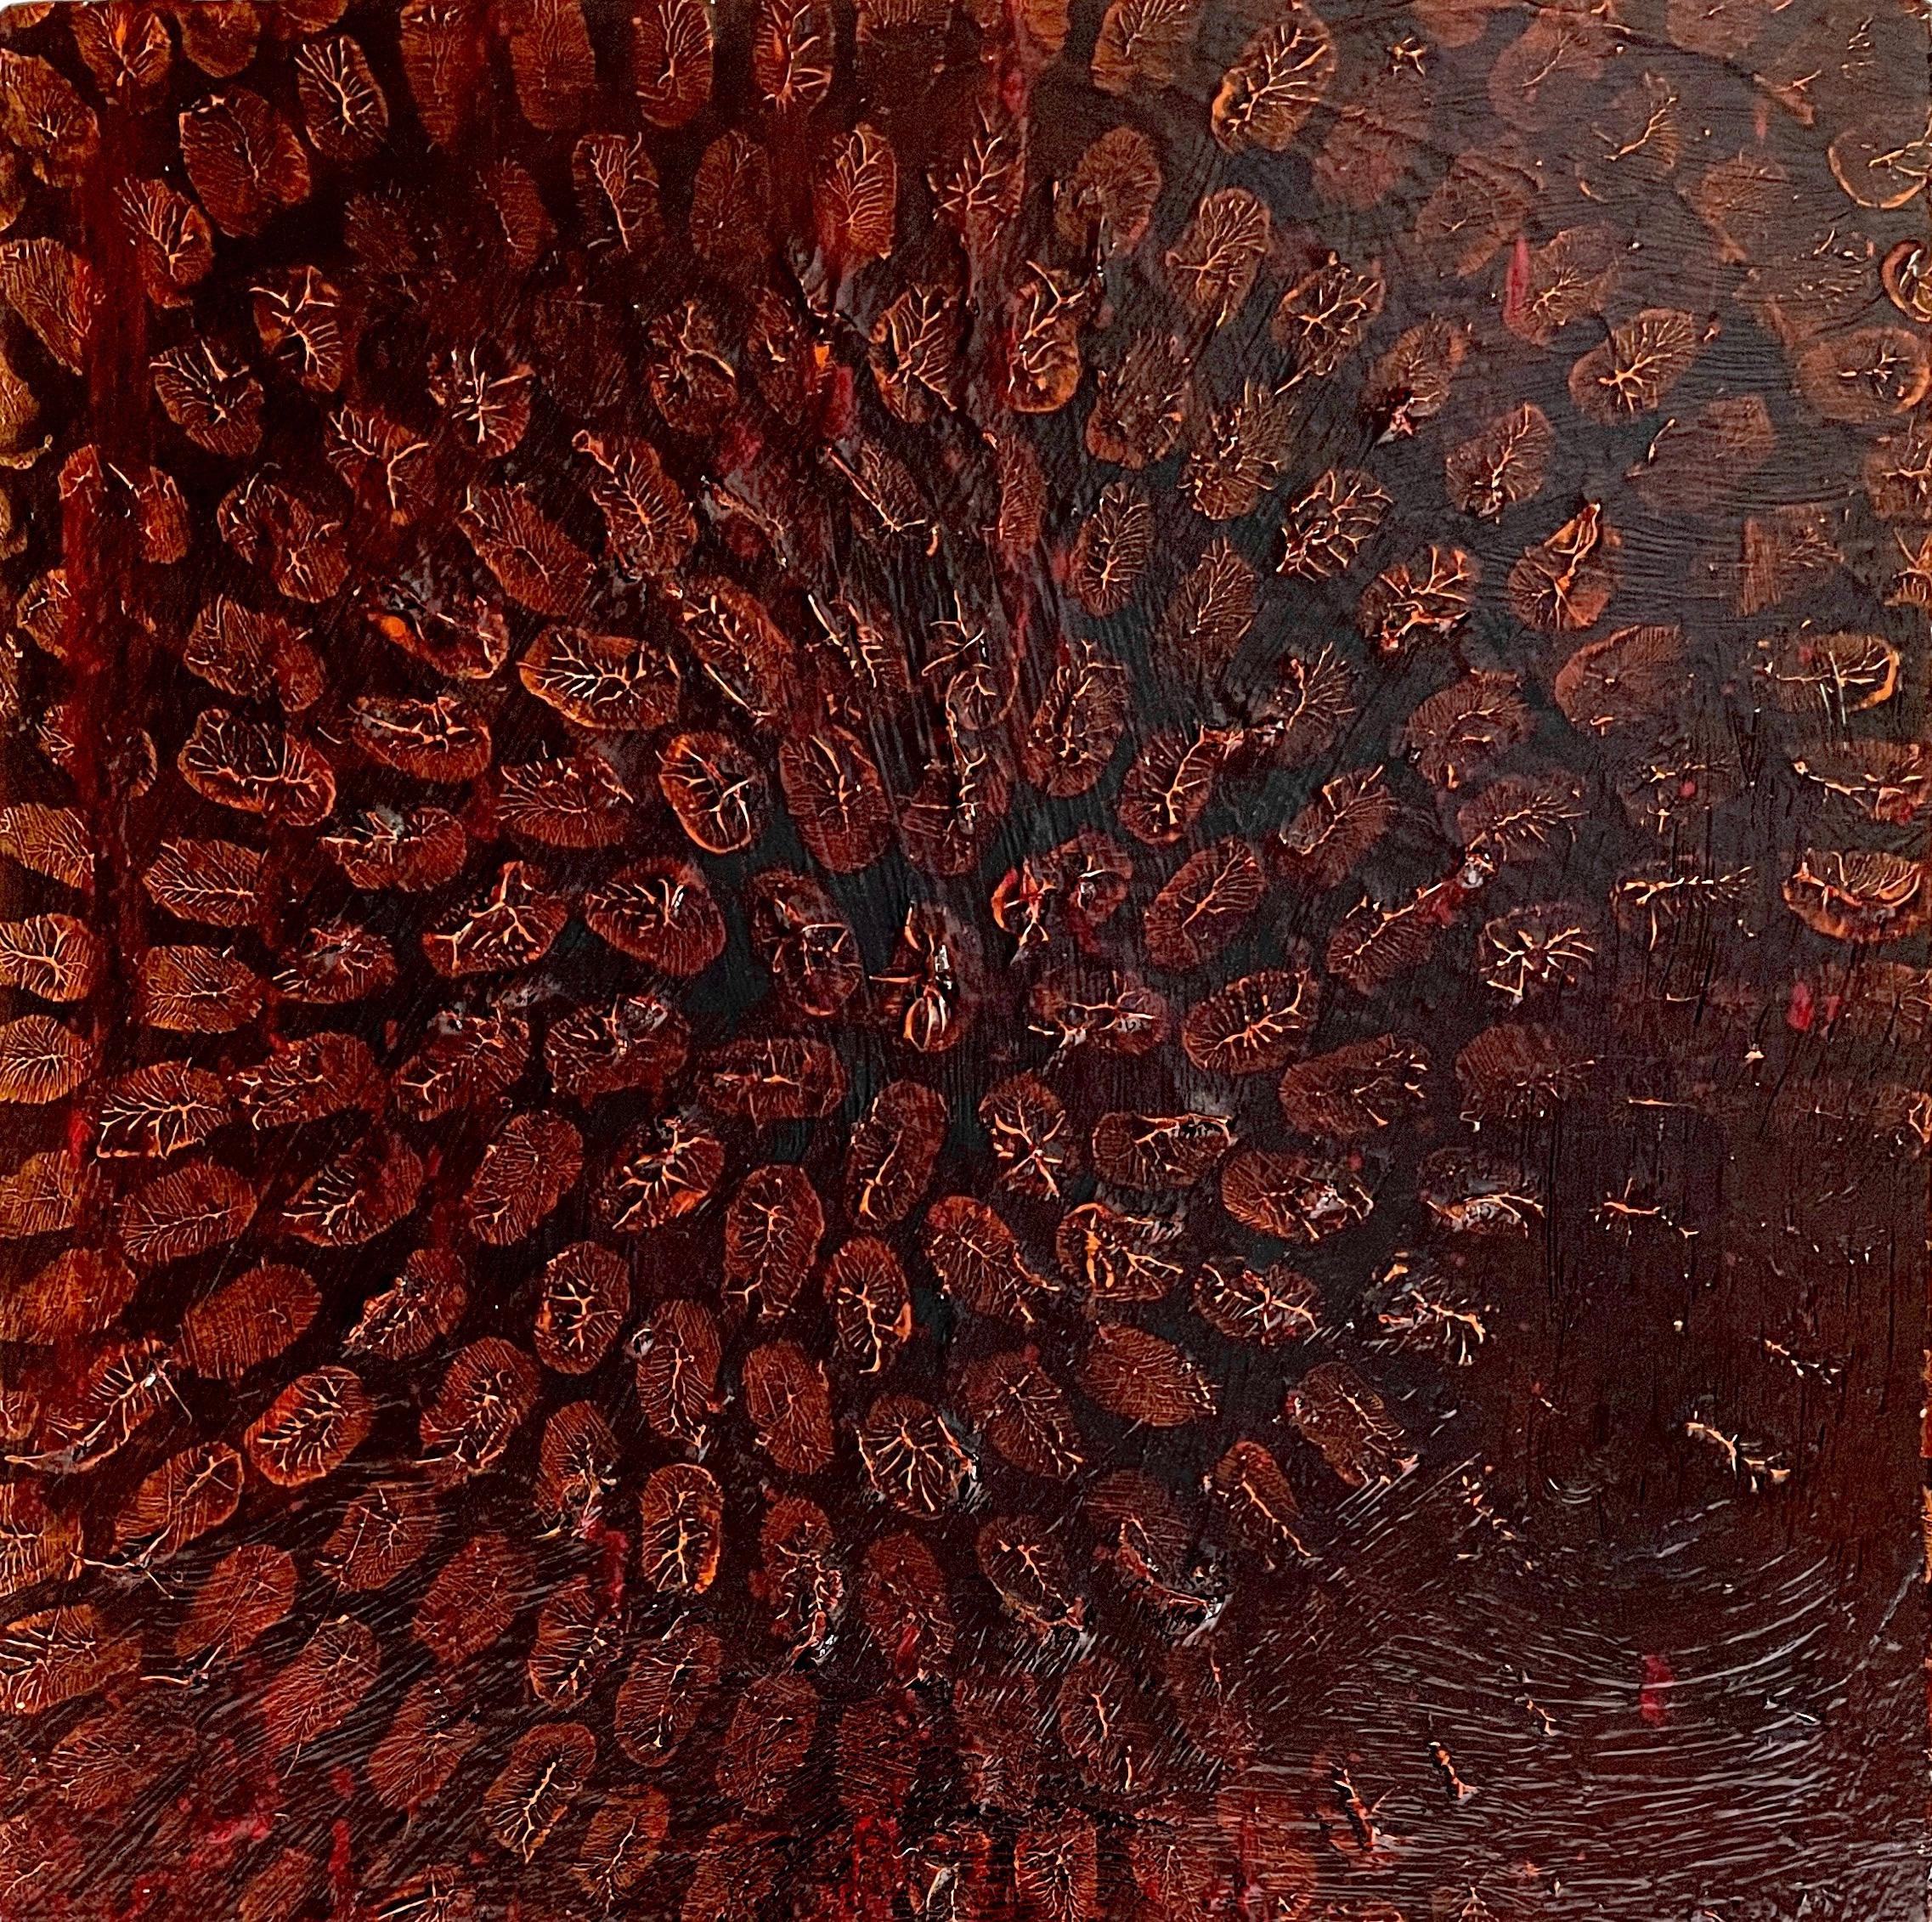 Antonio Puri Abstract Painting - Centered: abstract painting on canvas, dark earth tones & gold w/ circle mandala